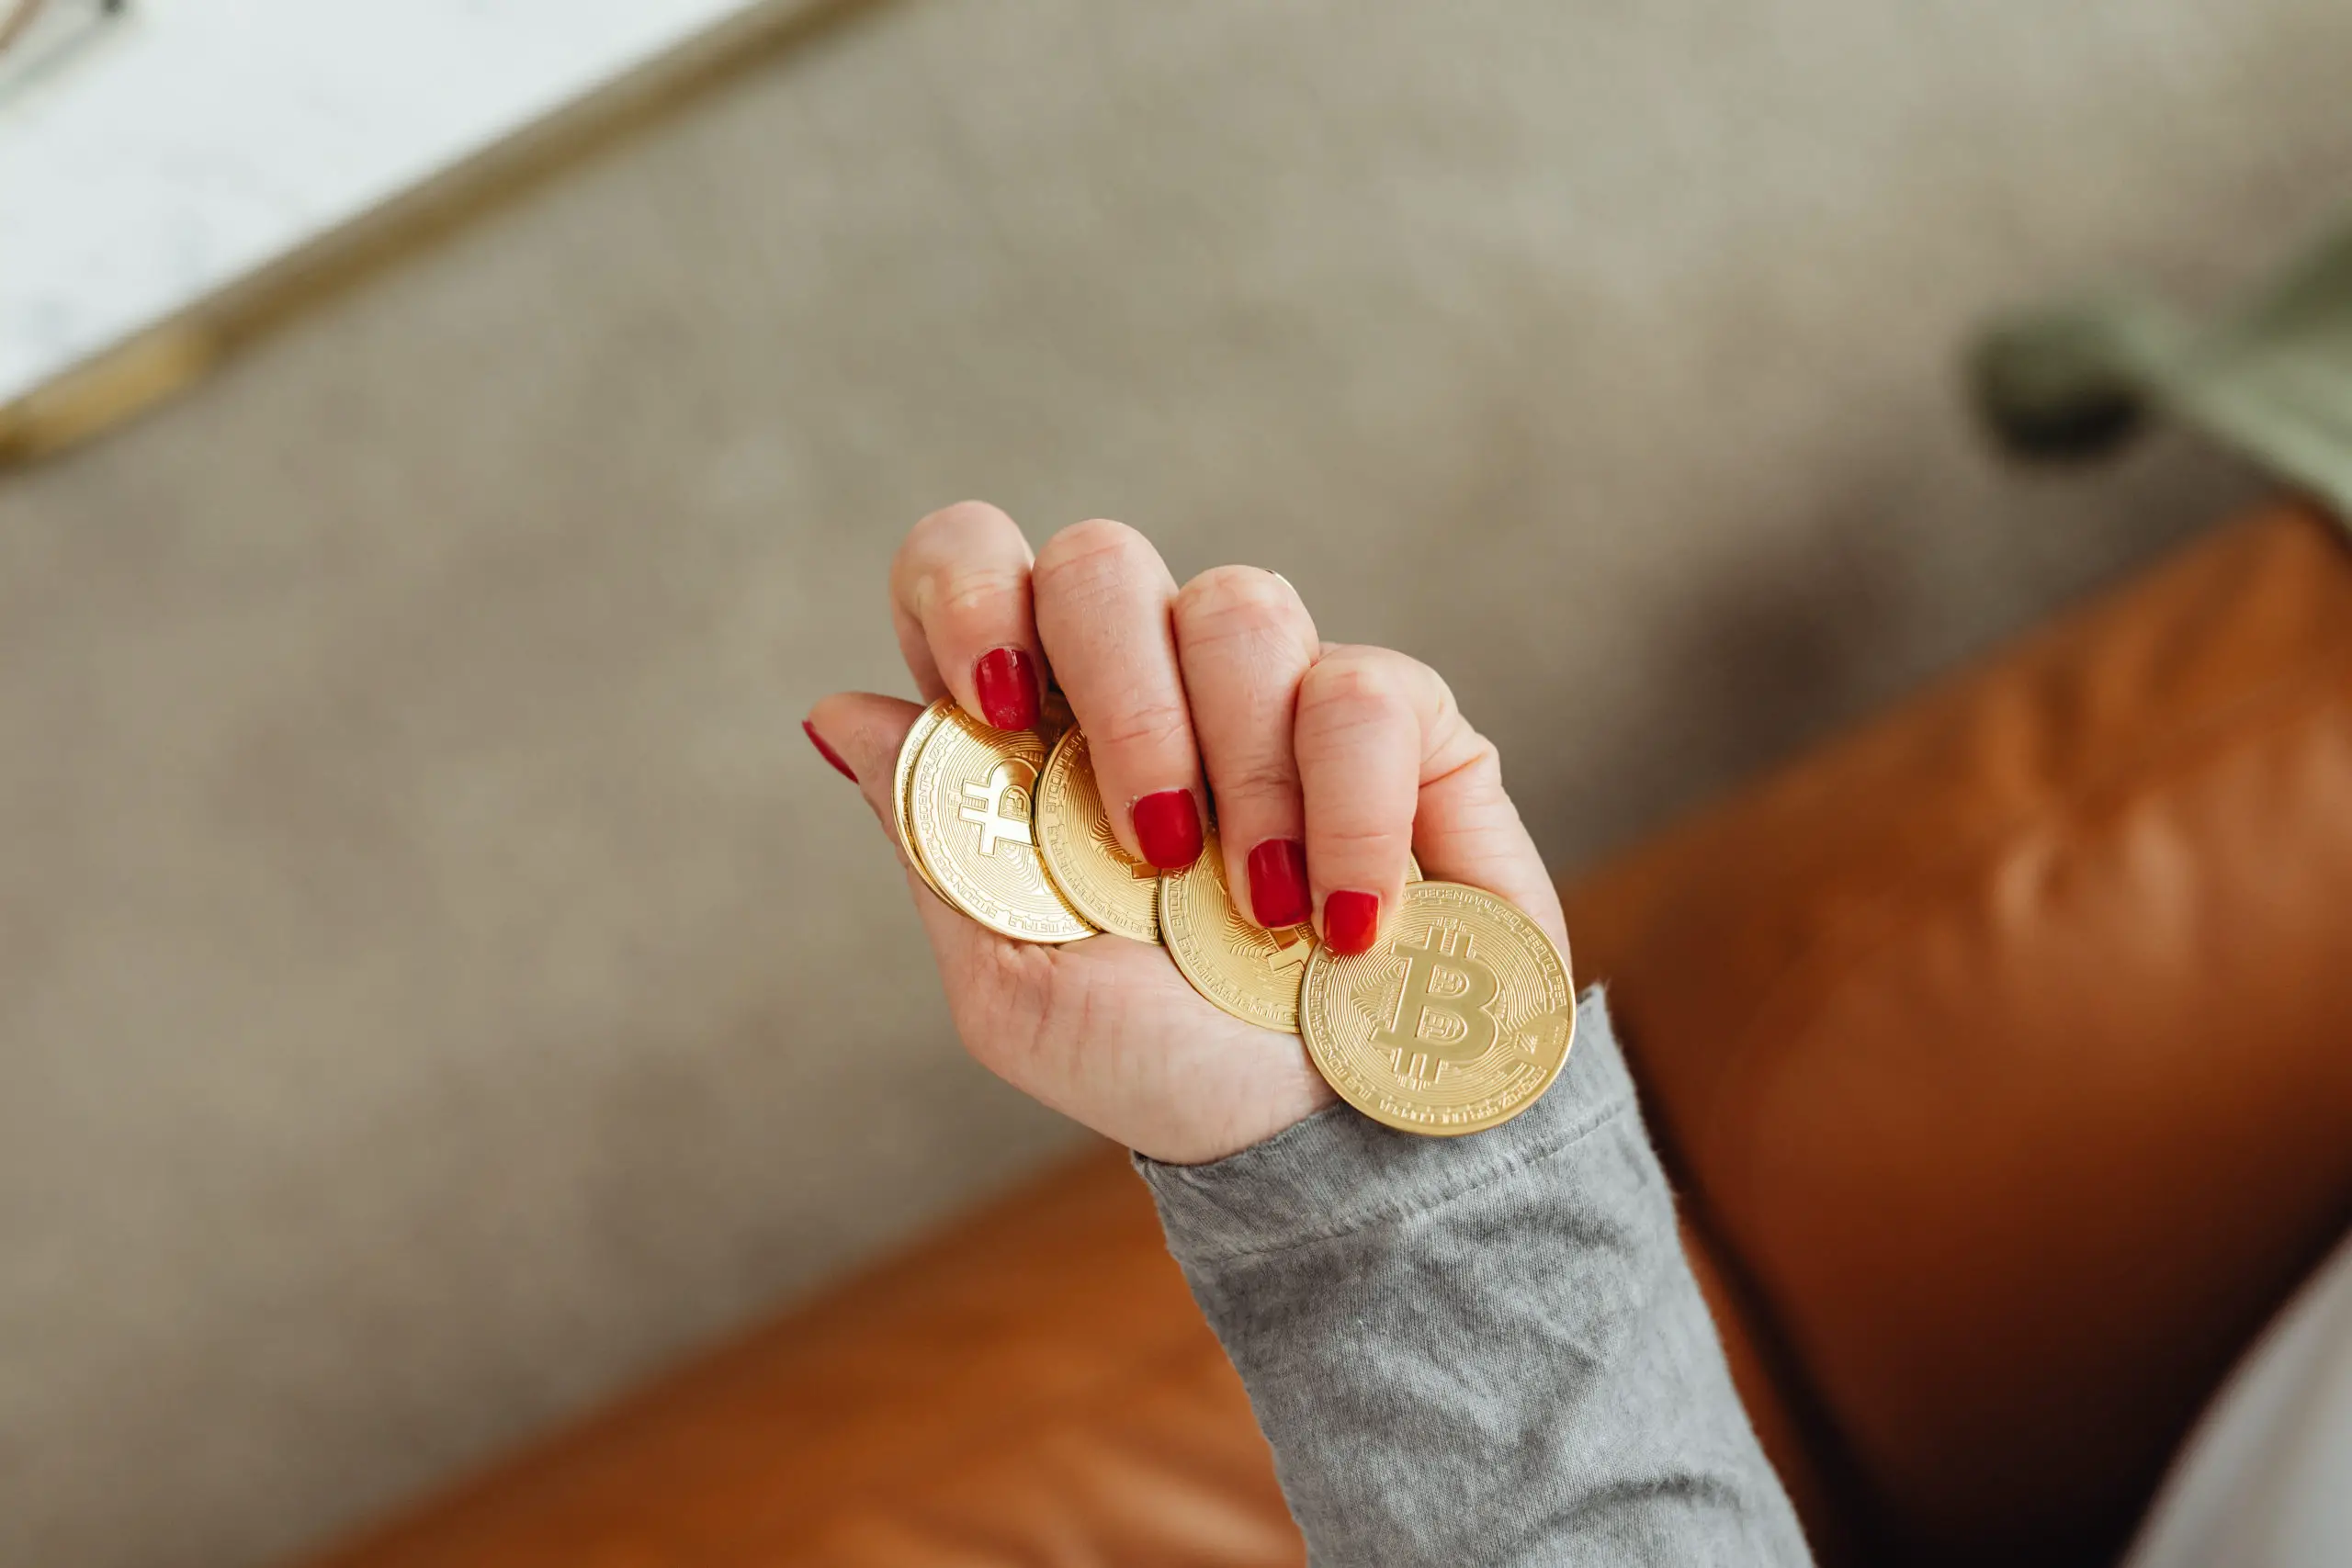 3 Must-Know Facts For Women Before Investing In Cryptocurrency